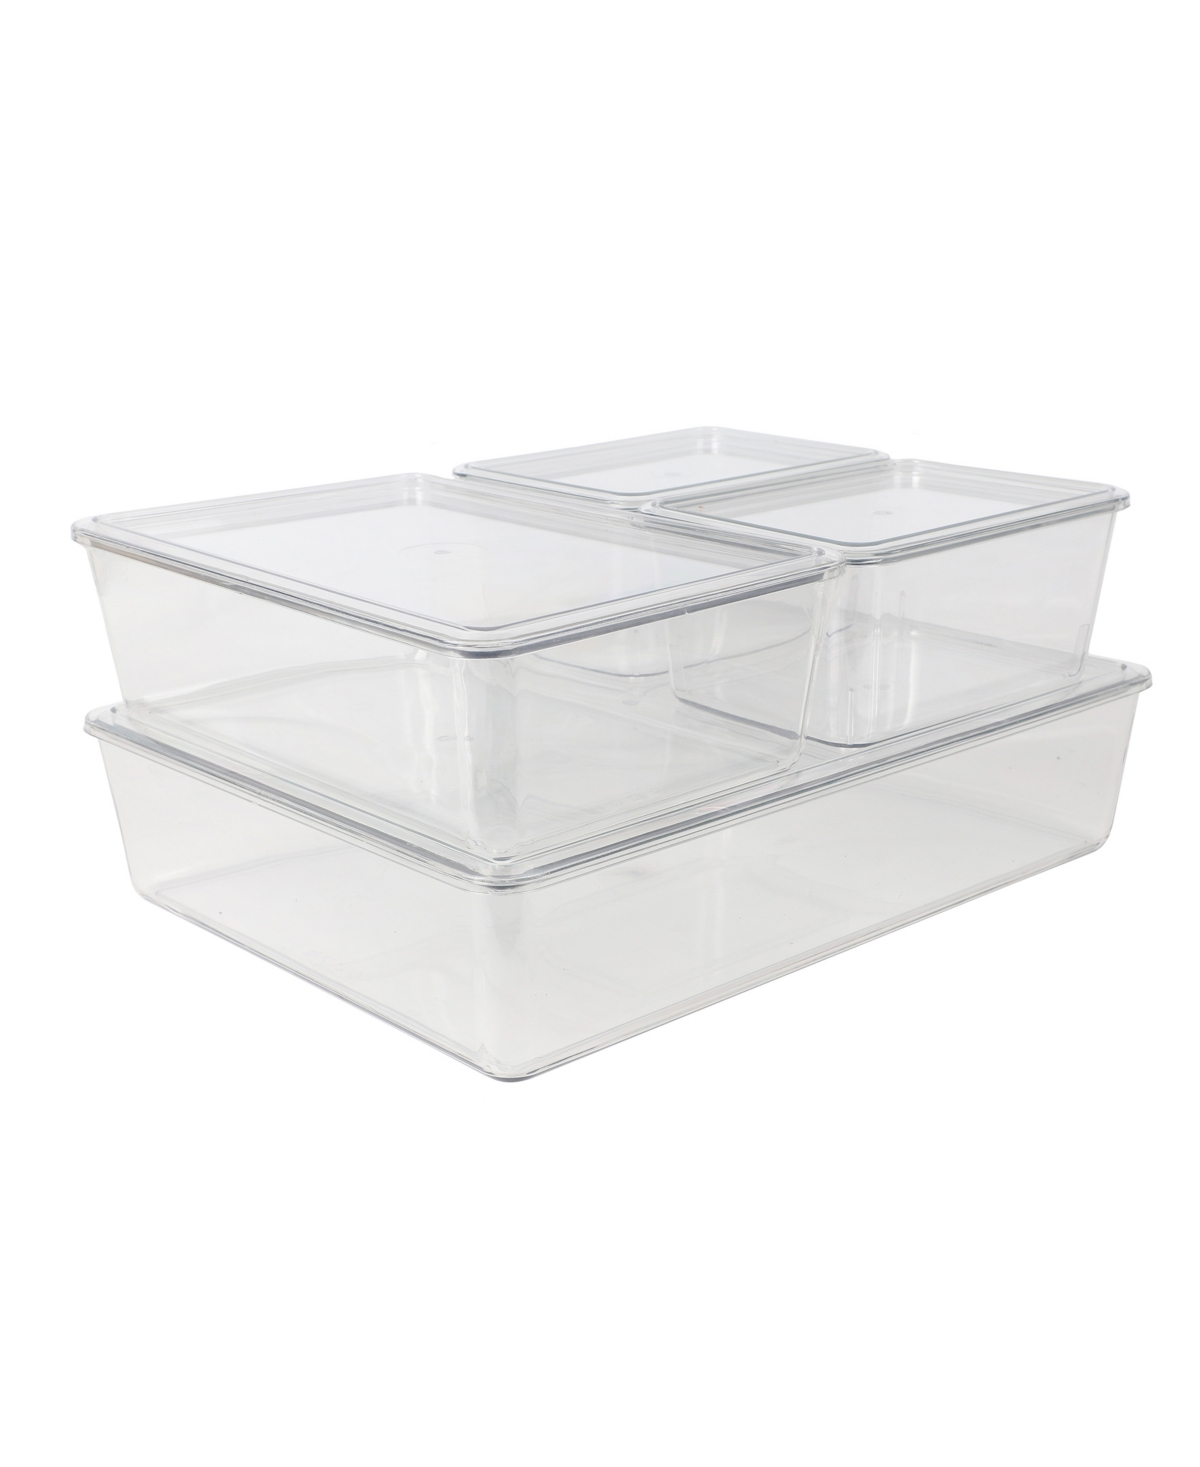 Martha Stewart Brody Stackable Plastic Storage Box With Lids Office Desktop Organizers, Set Of 4, 2 Small, 1 Medium In Clear